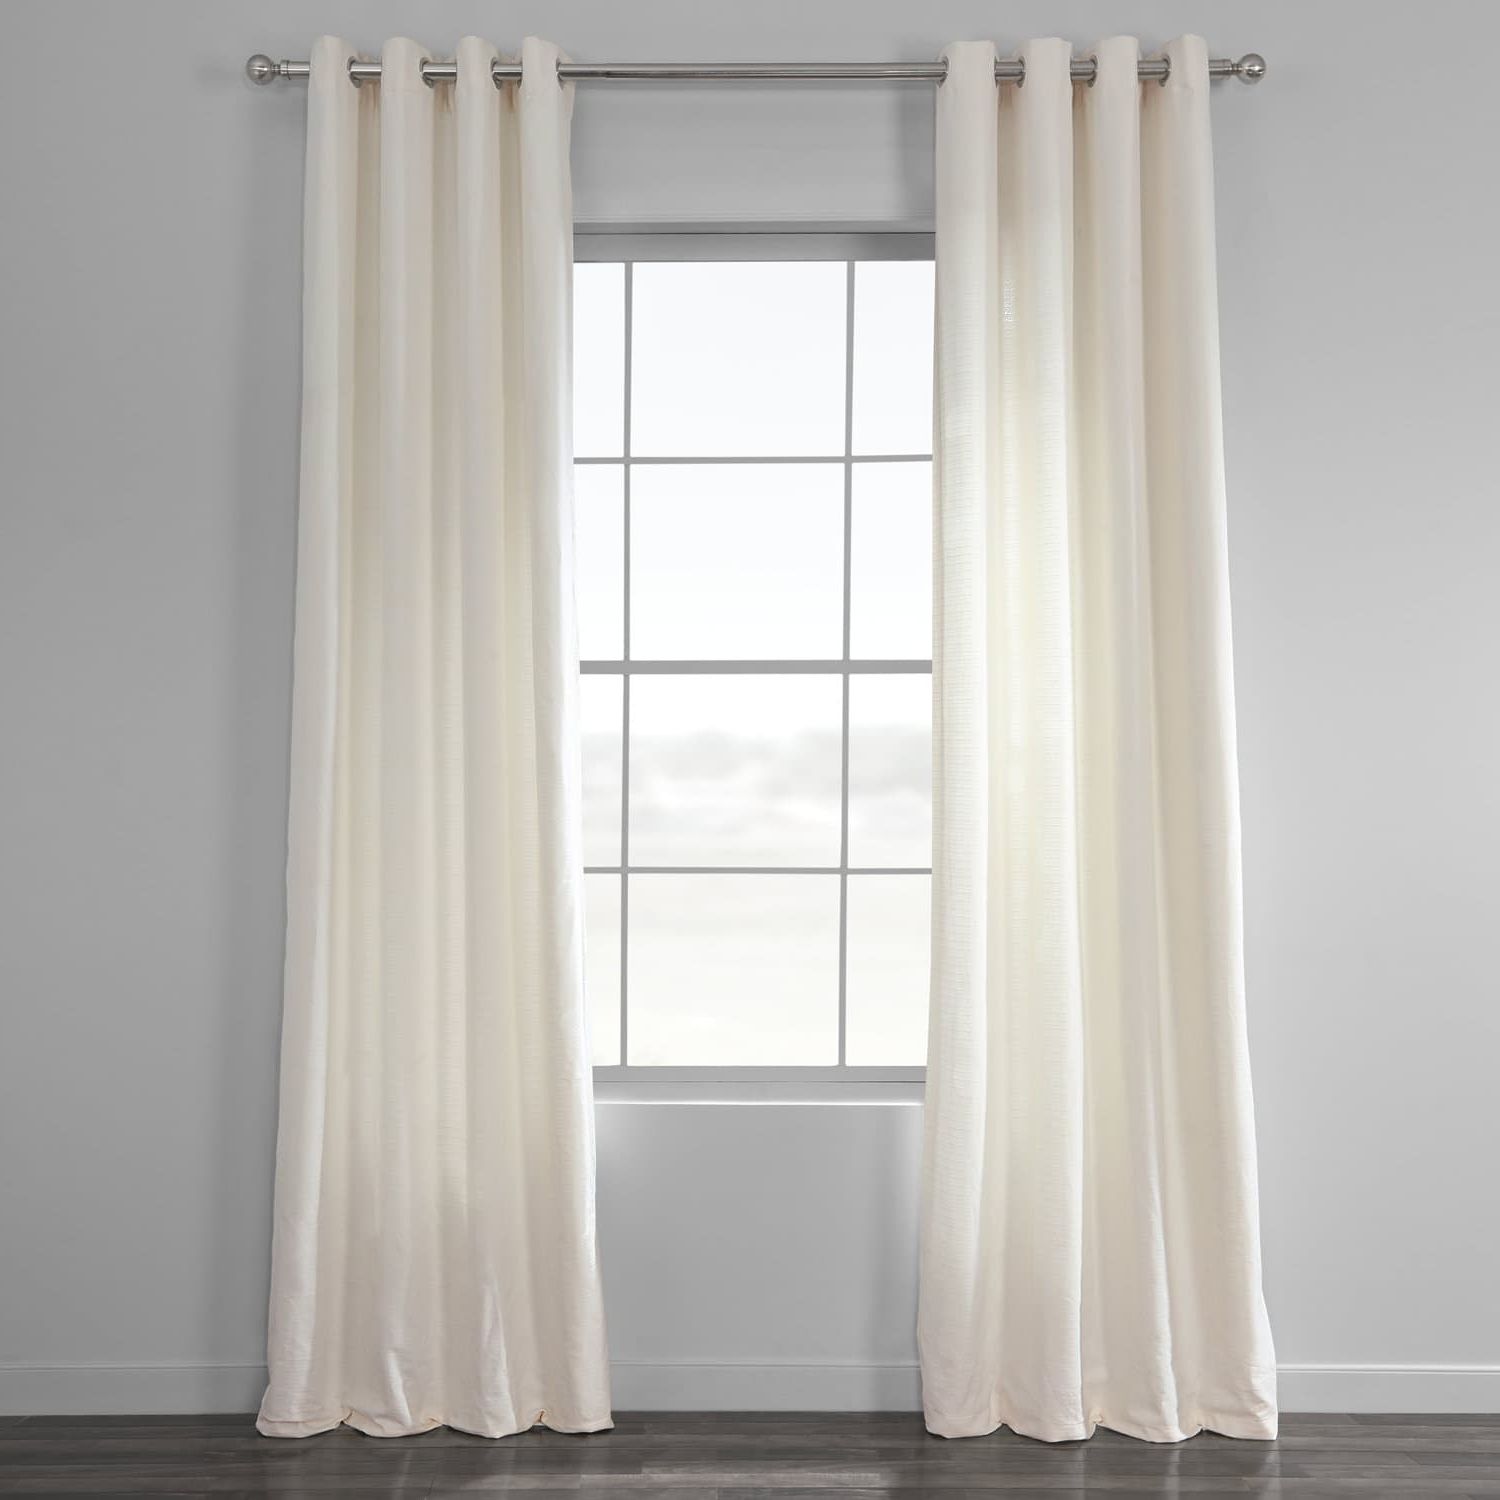 Bark Weave Solid Cotton Curtains In Fashionable Birch Bark Weave Solid Cotton Grommet Curtain (View 10 of 20)